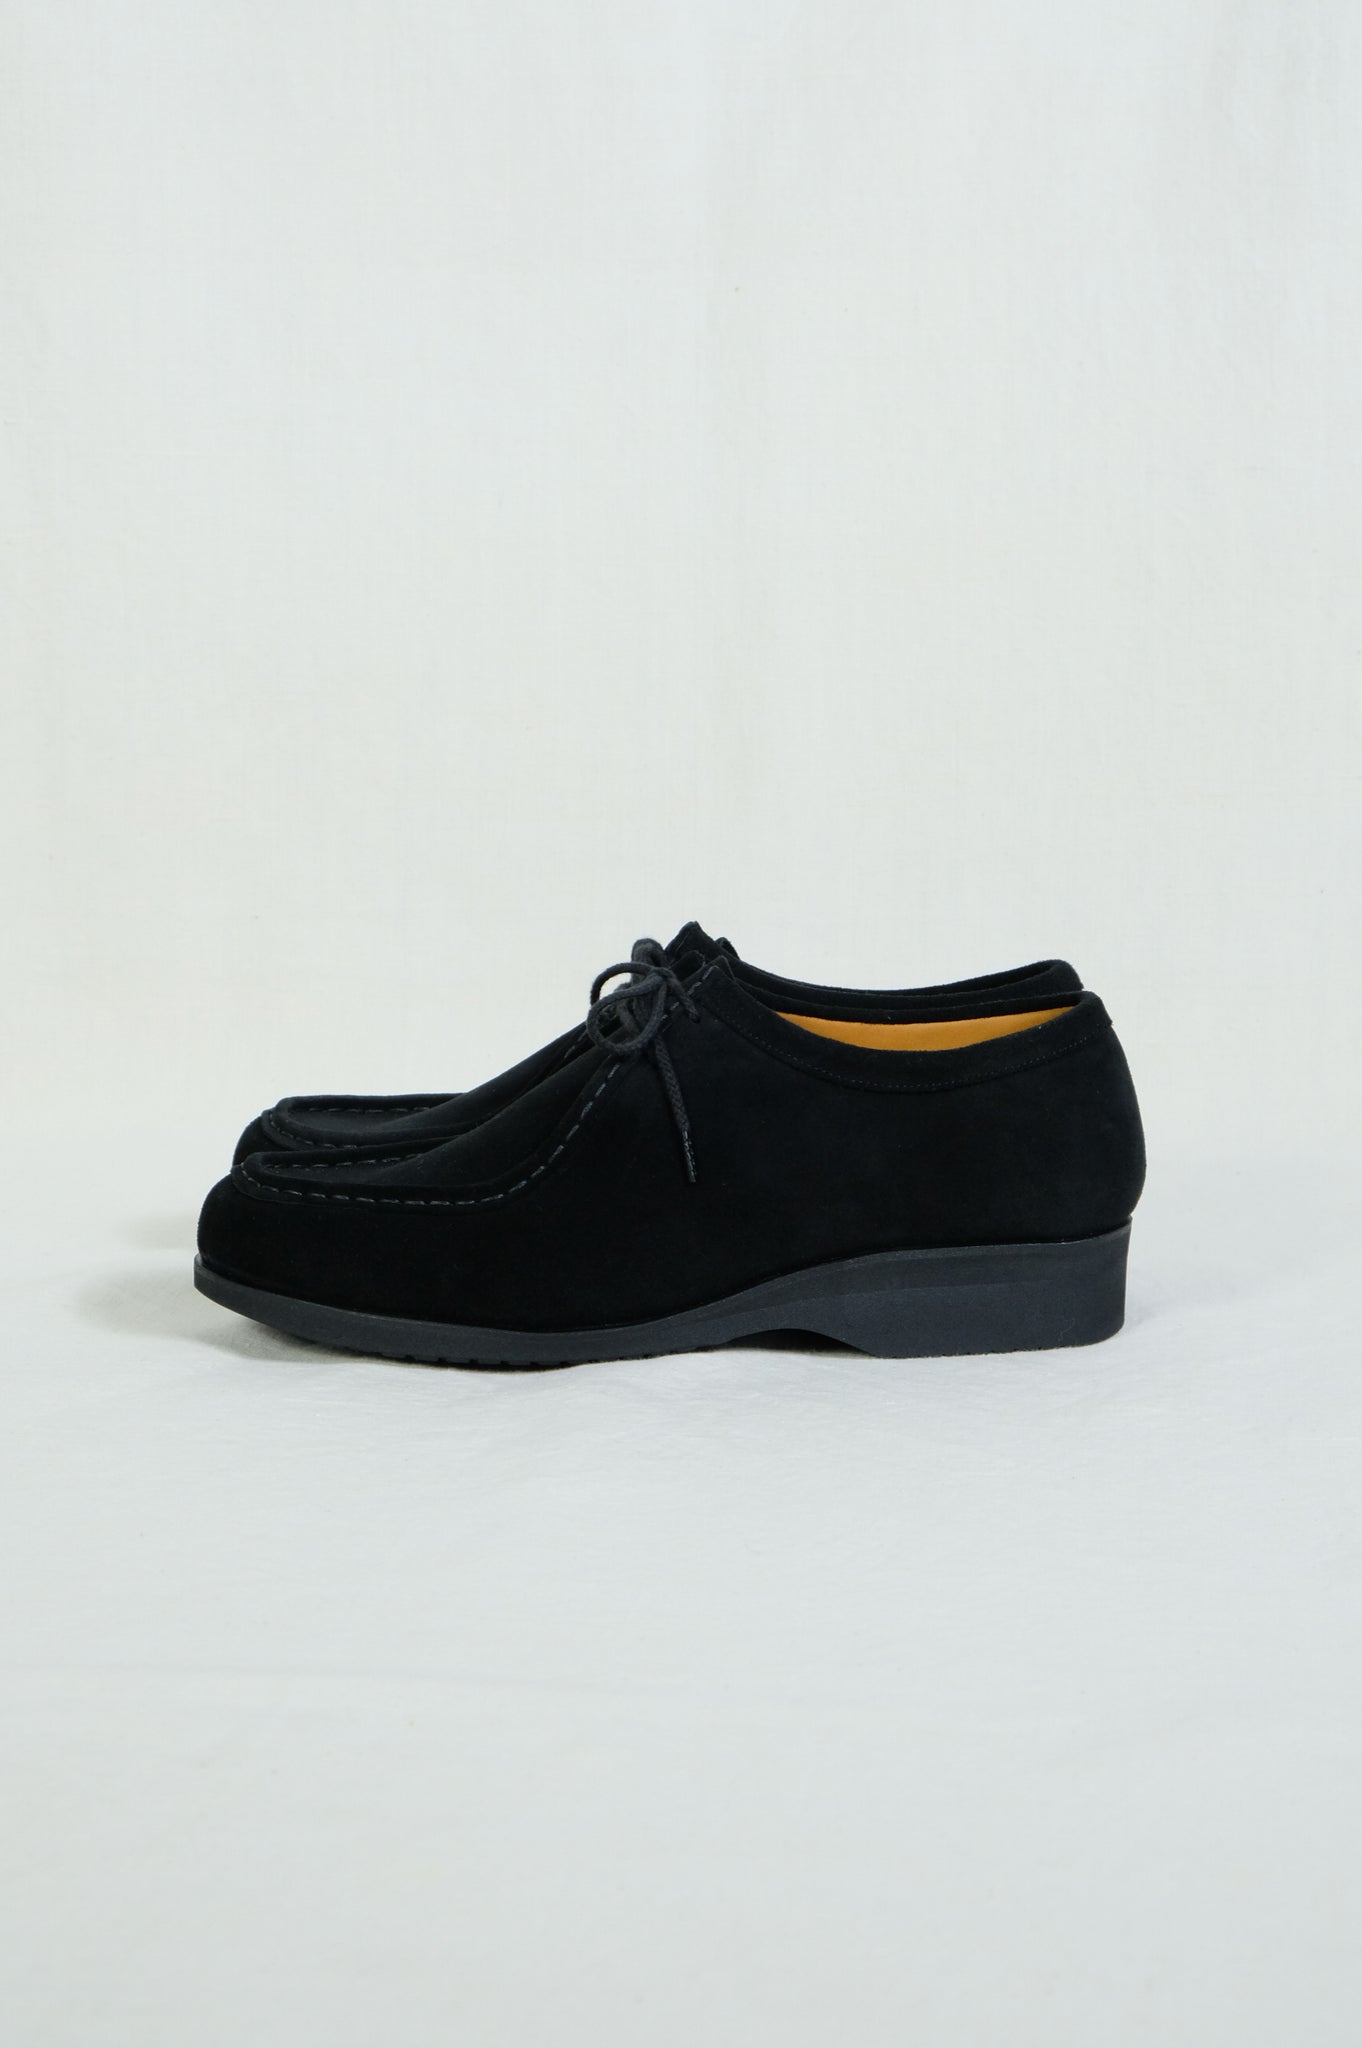 FOOTWORKS "TIROLEAN SHOES / SUEDE LEATHER"